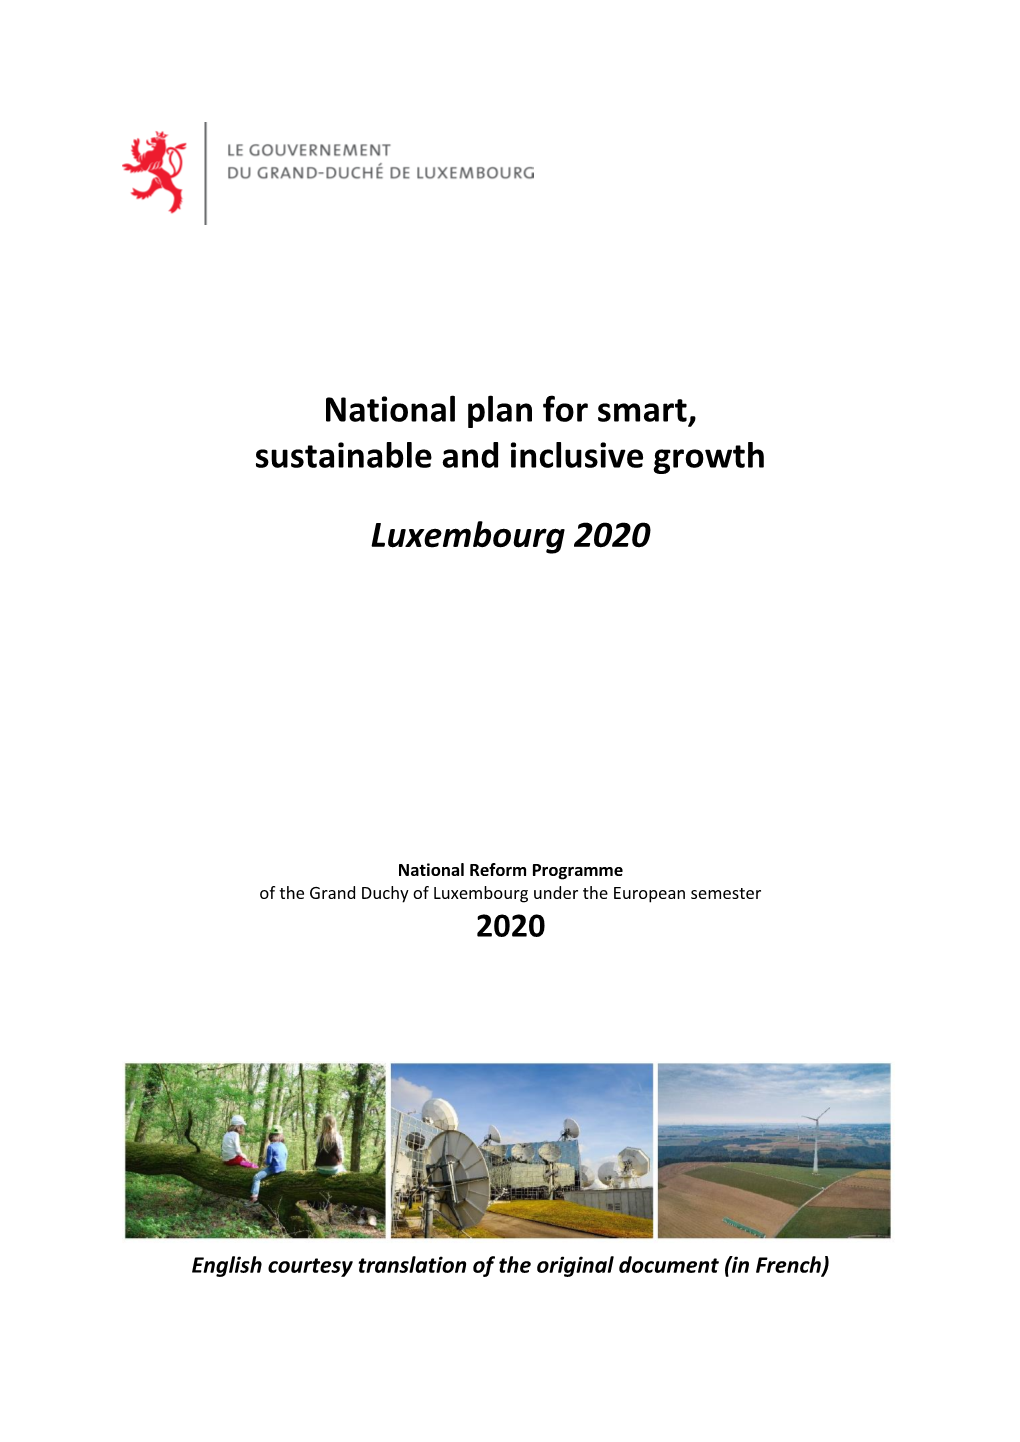 National Plan for Smart, Sustainable and Inclusive Growth Luxembourg 2020